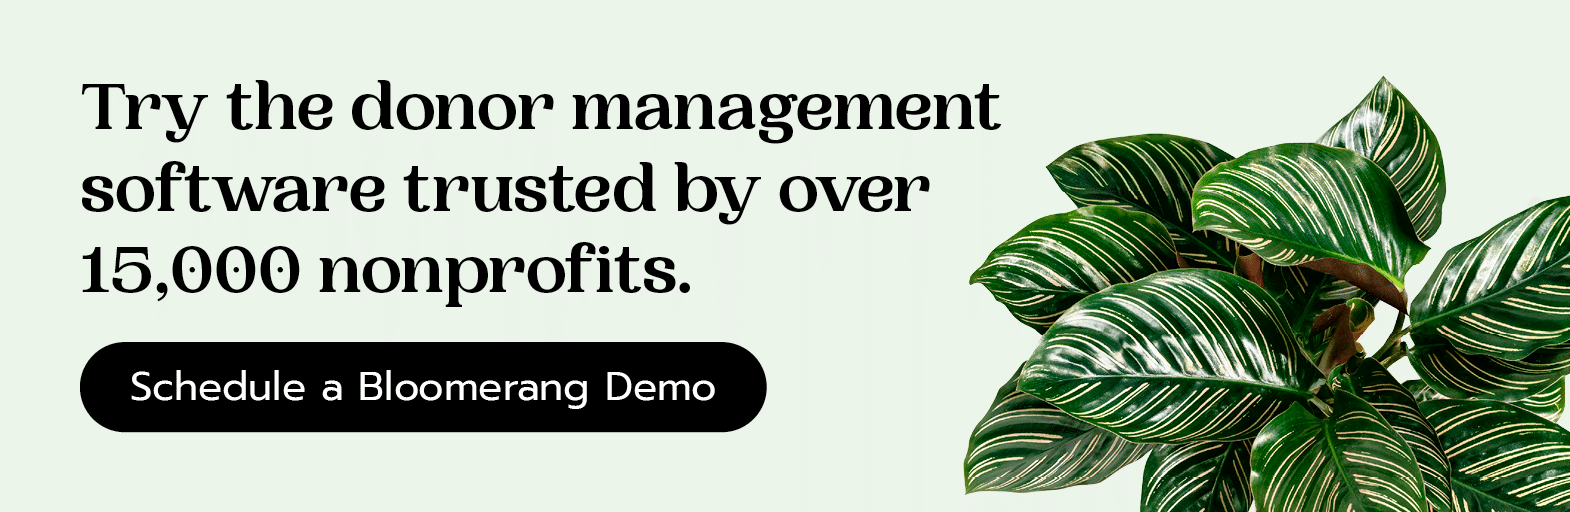 Try the donor management software trusted by over 15,000 nonprofits. Click here to schedule a Bloomerang demo.